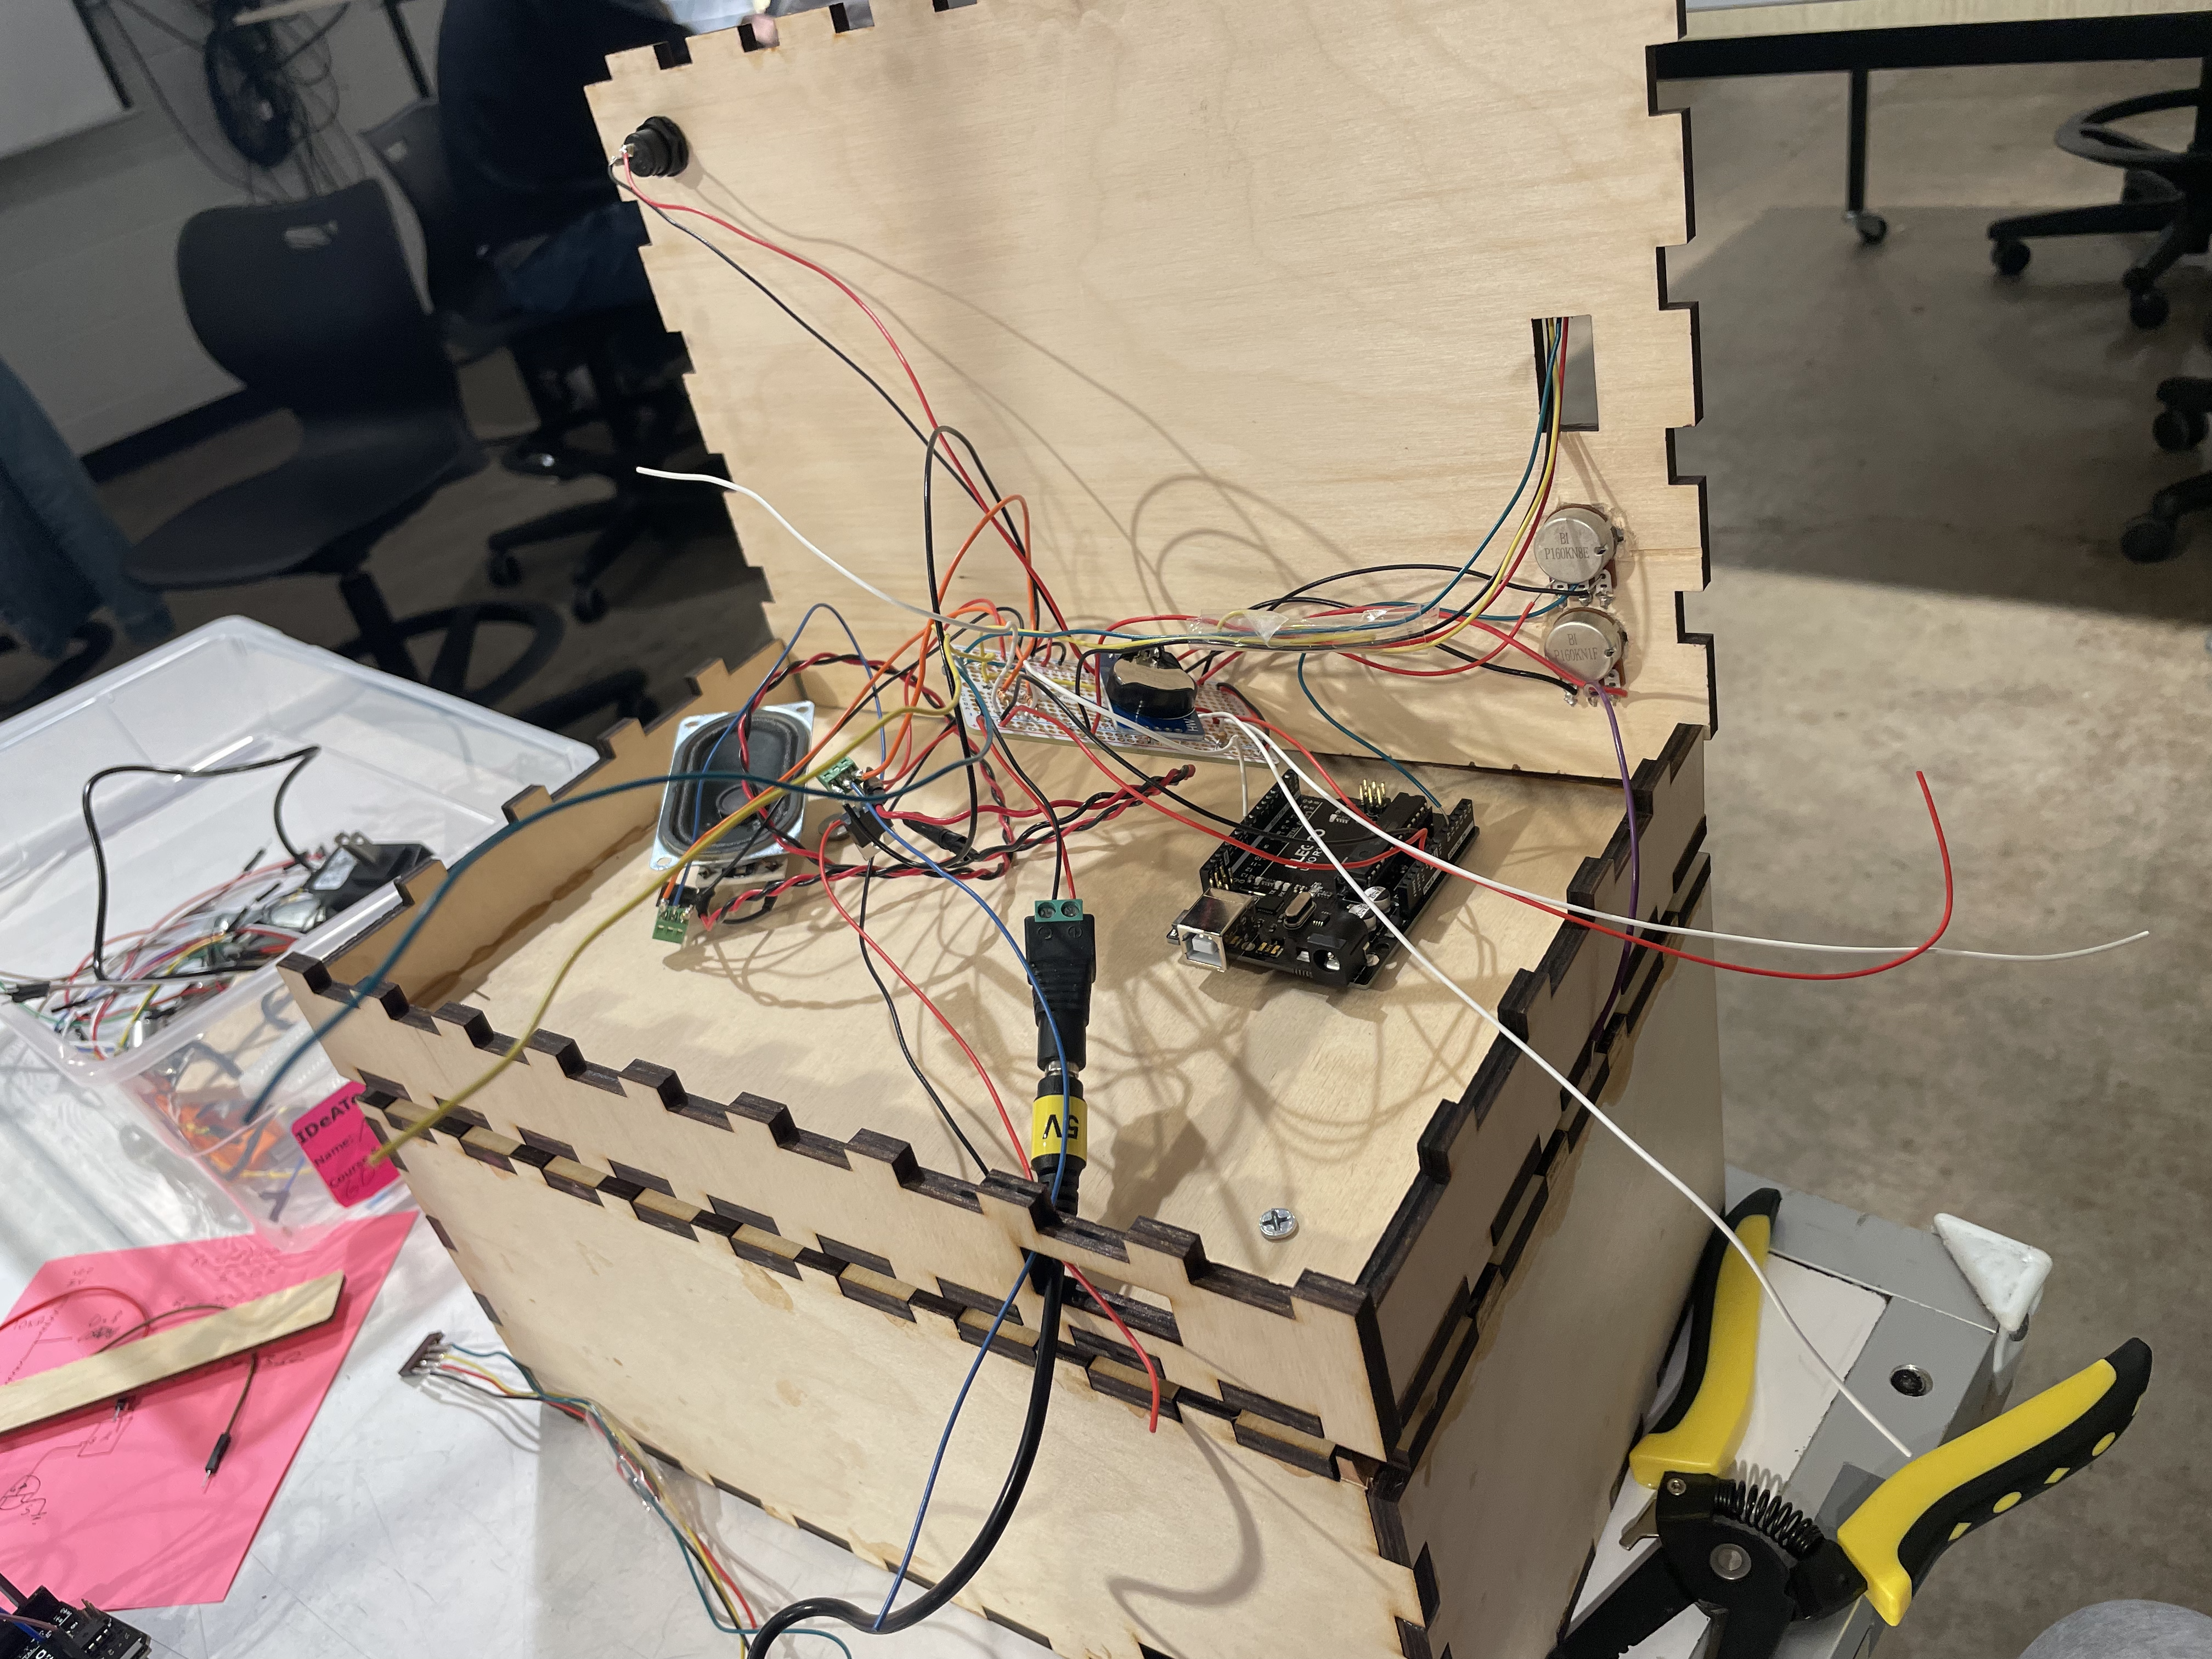 Open box with wires running from Arduino to separate electronics